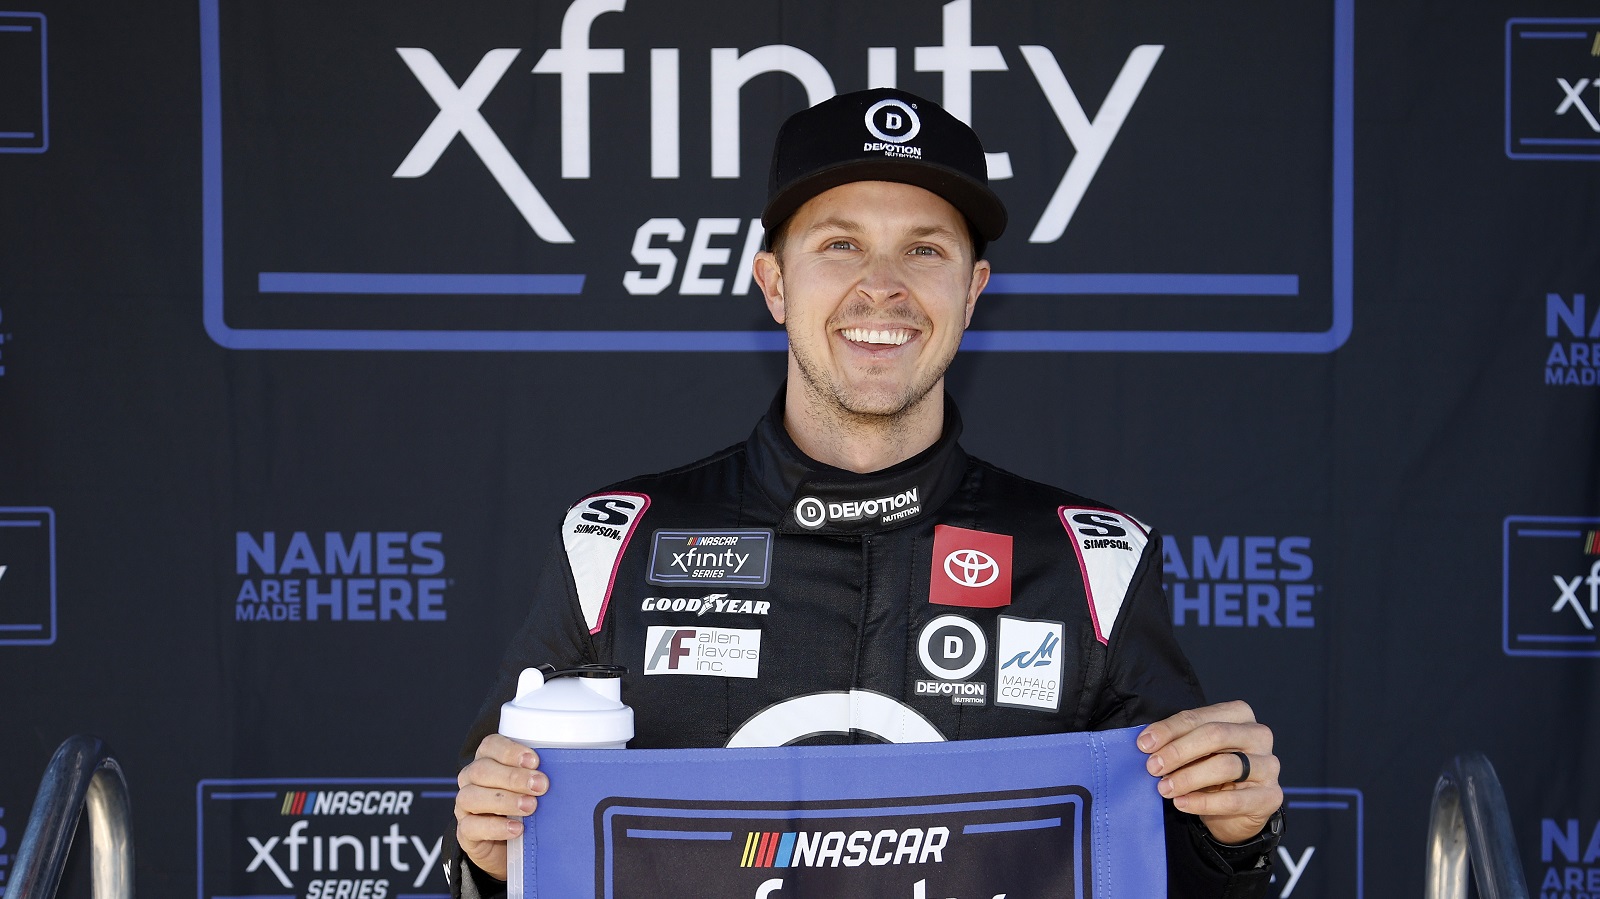 Trevor Bayne, driver of the No. 18 Toyota for Joe Gibbs Racing, poses for photos after winning the pole in qualifying for the NASCAR Xfinity Series United Rentals 200 at Phoenix Raceway on March 12, 2022.